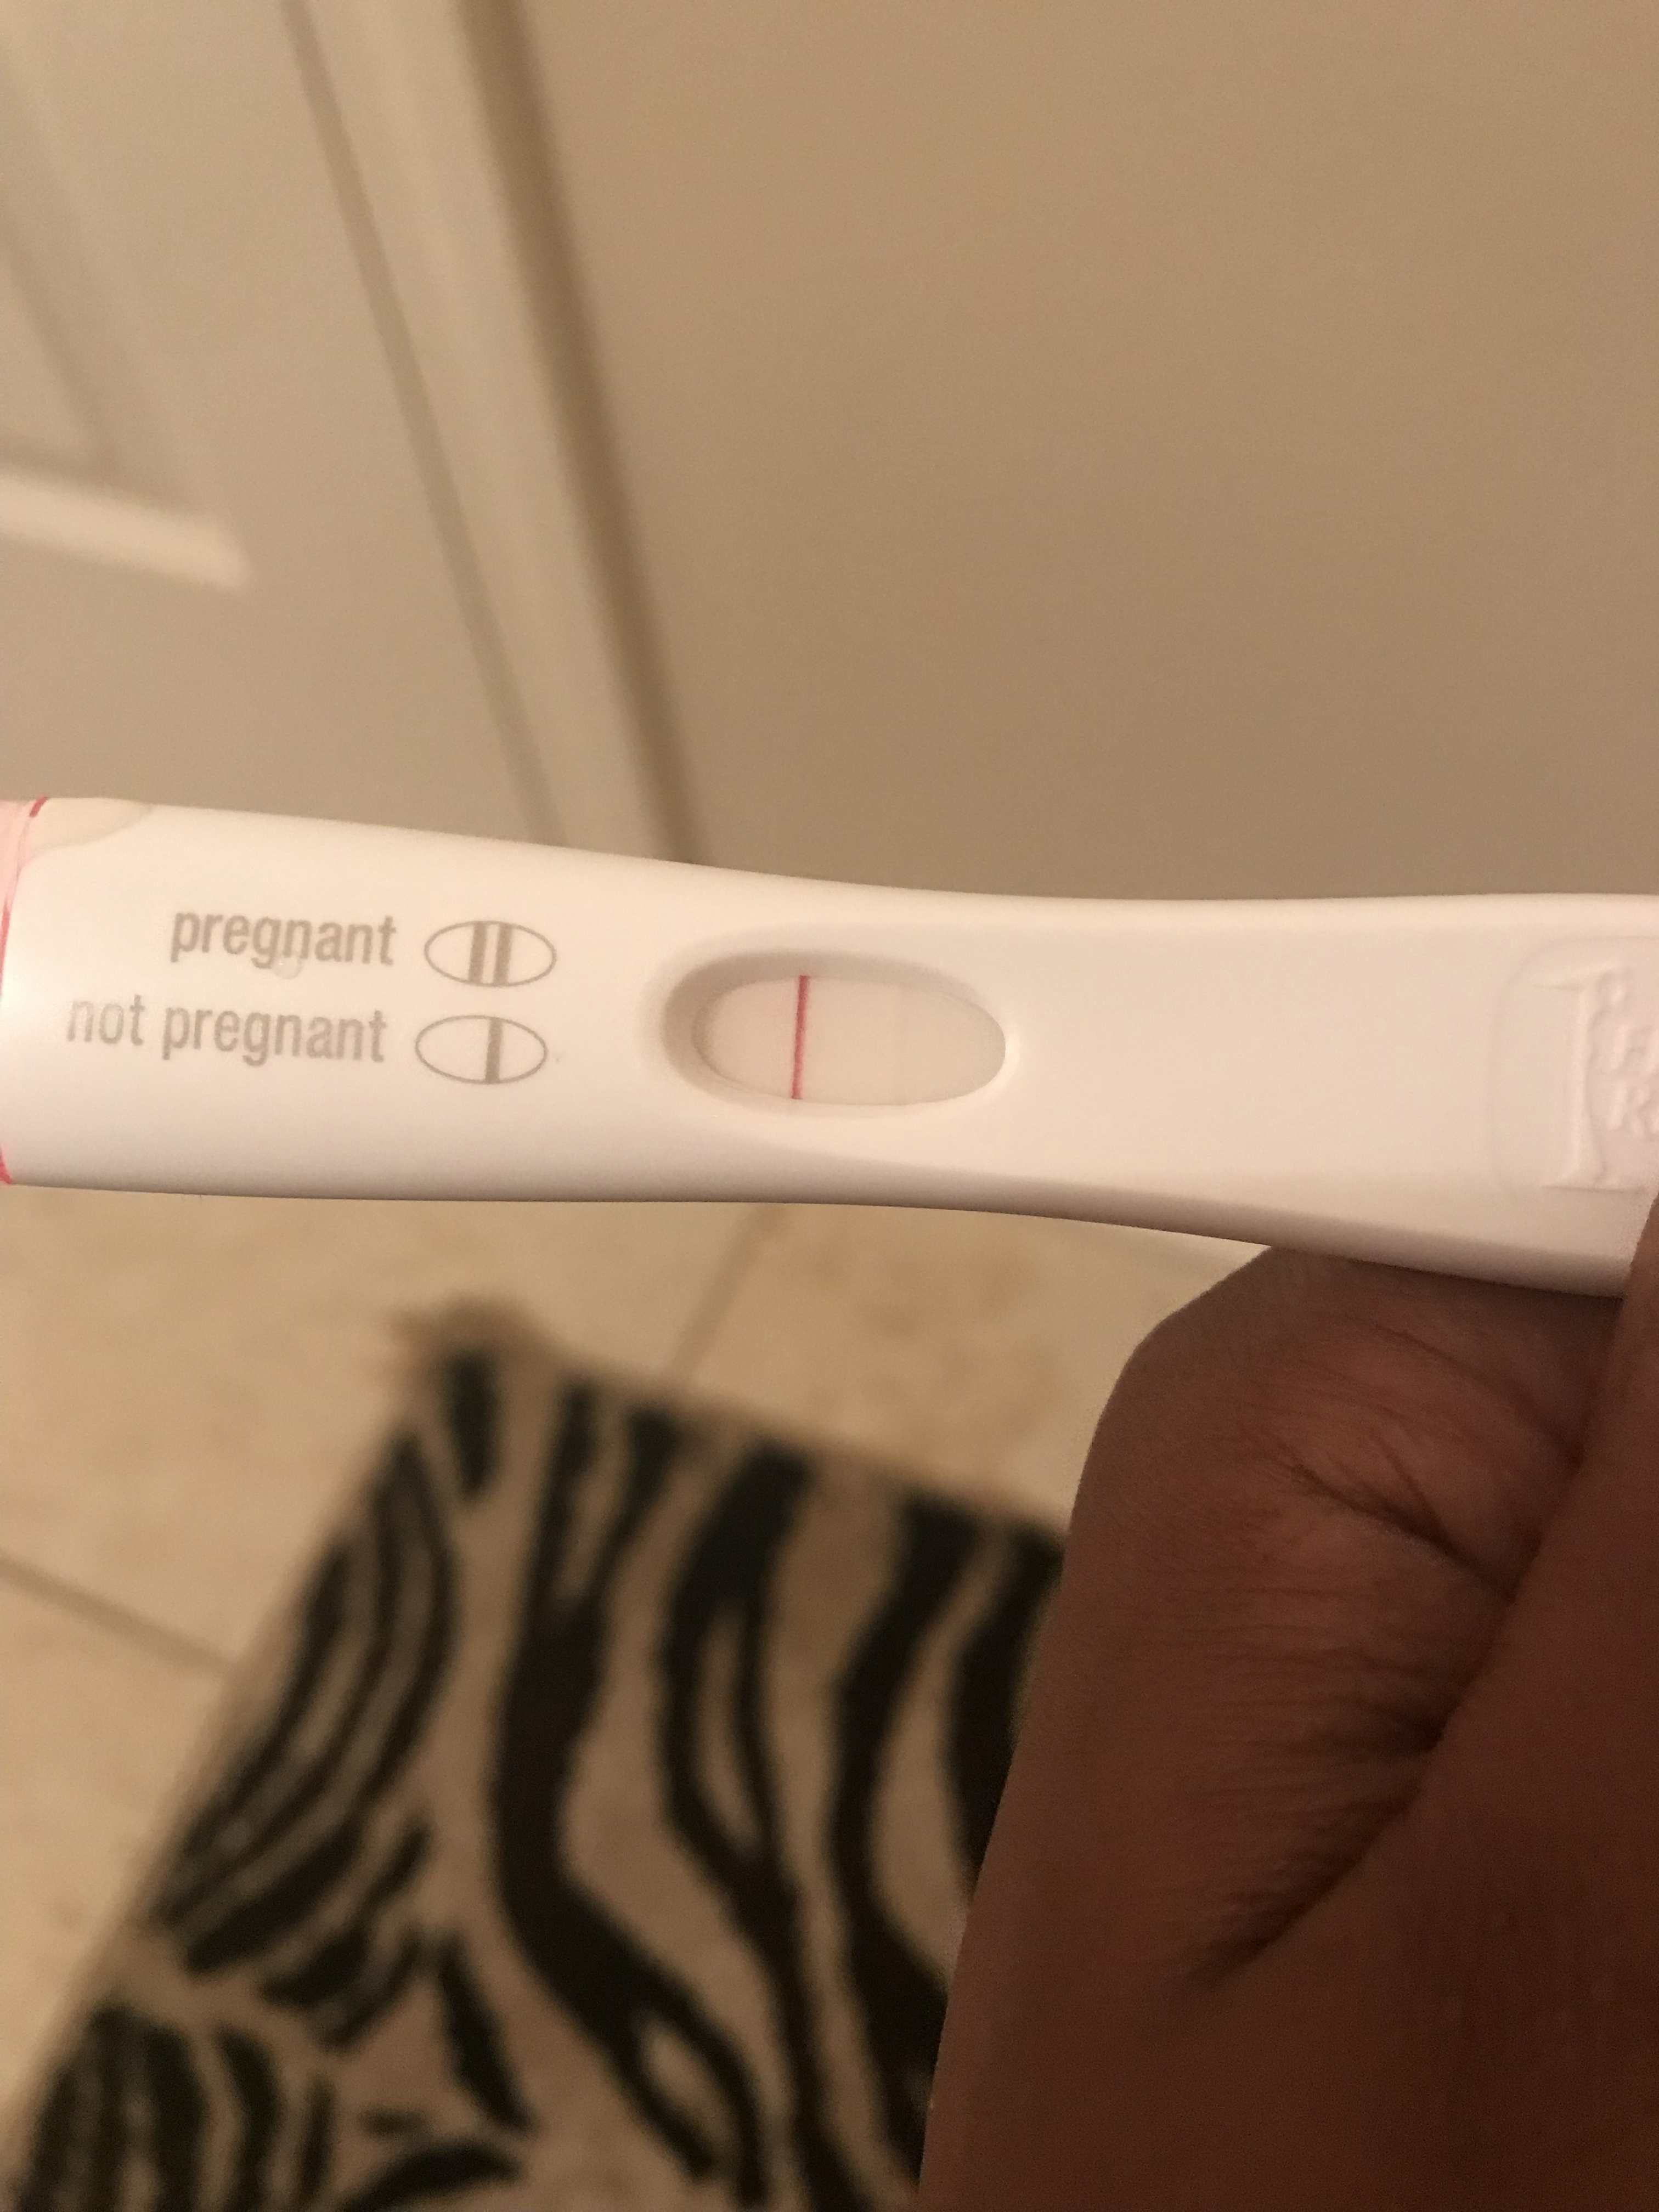 Dark Bfp Day Before Missed Period March 2019 Babies Forums What